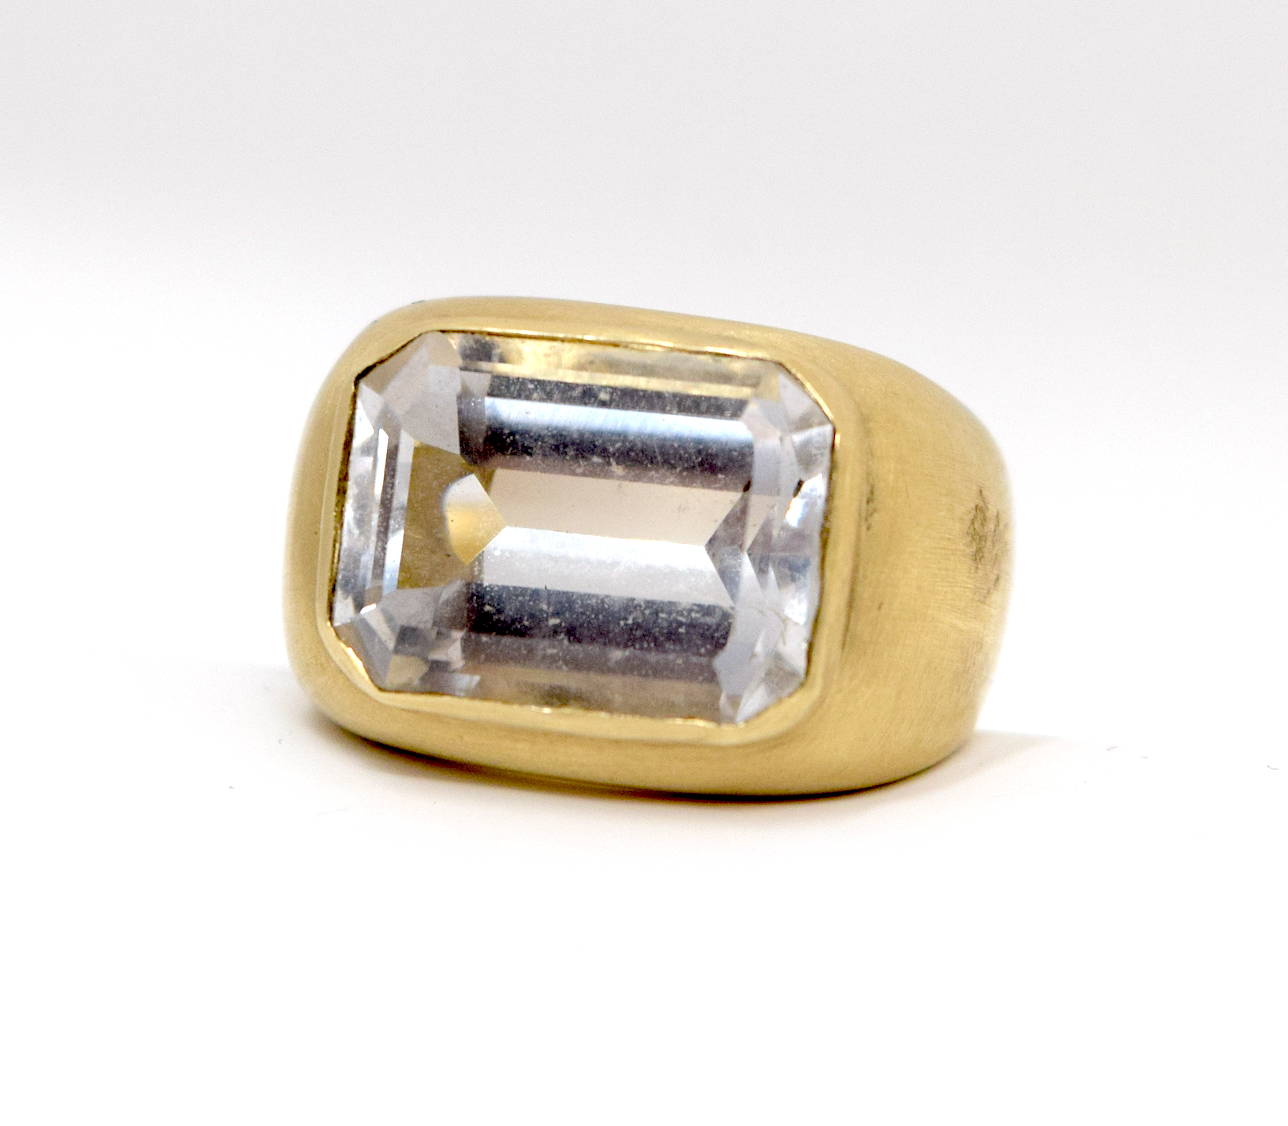 Princess Annabelle Rings in heavy 2.5 Micron 18k Gold Plating and with Satin Finish